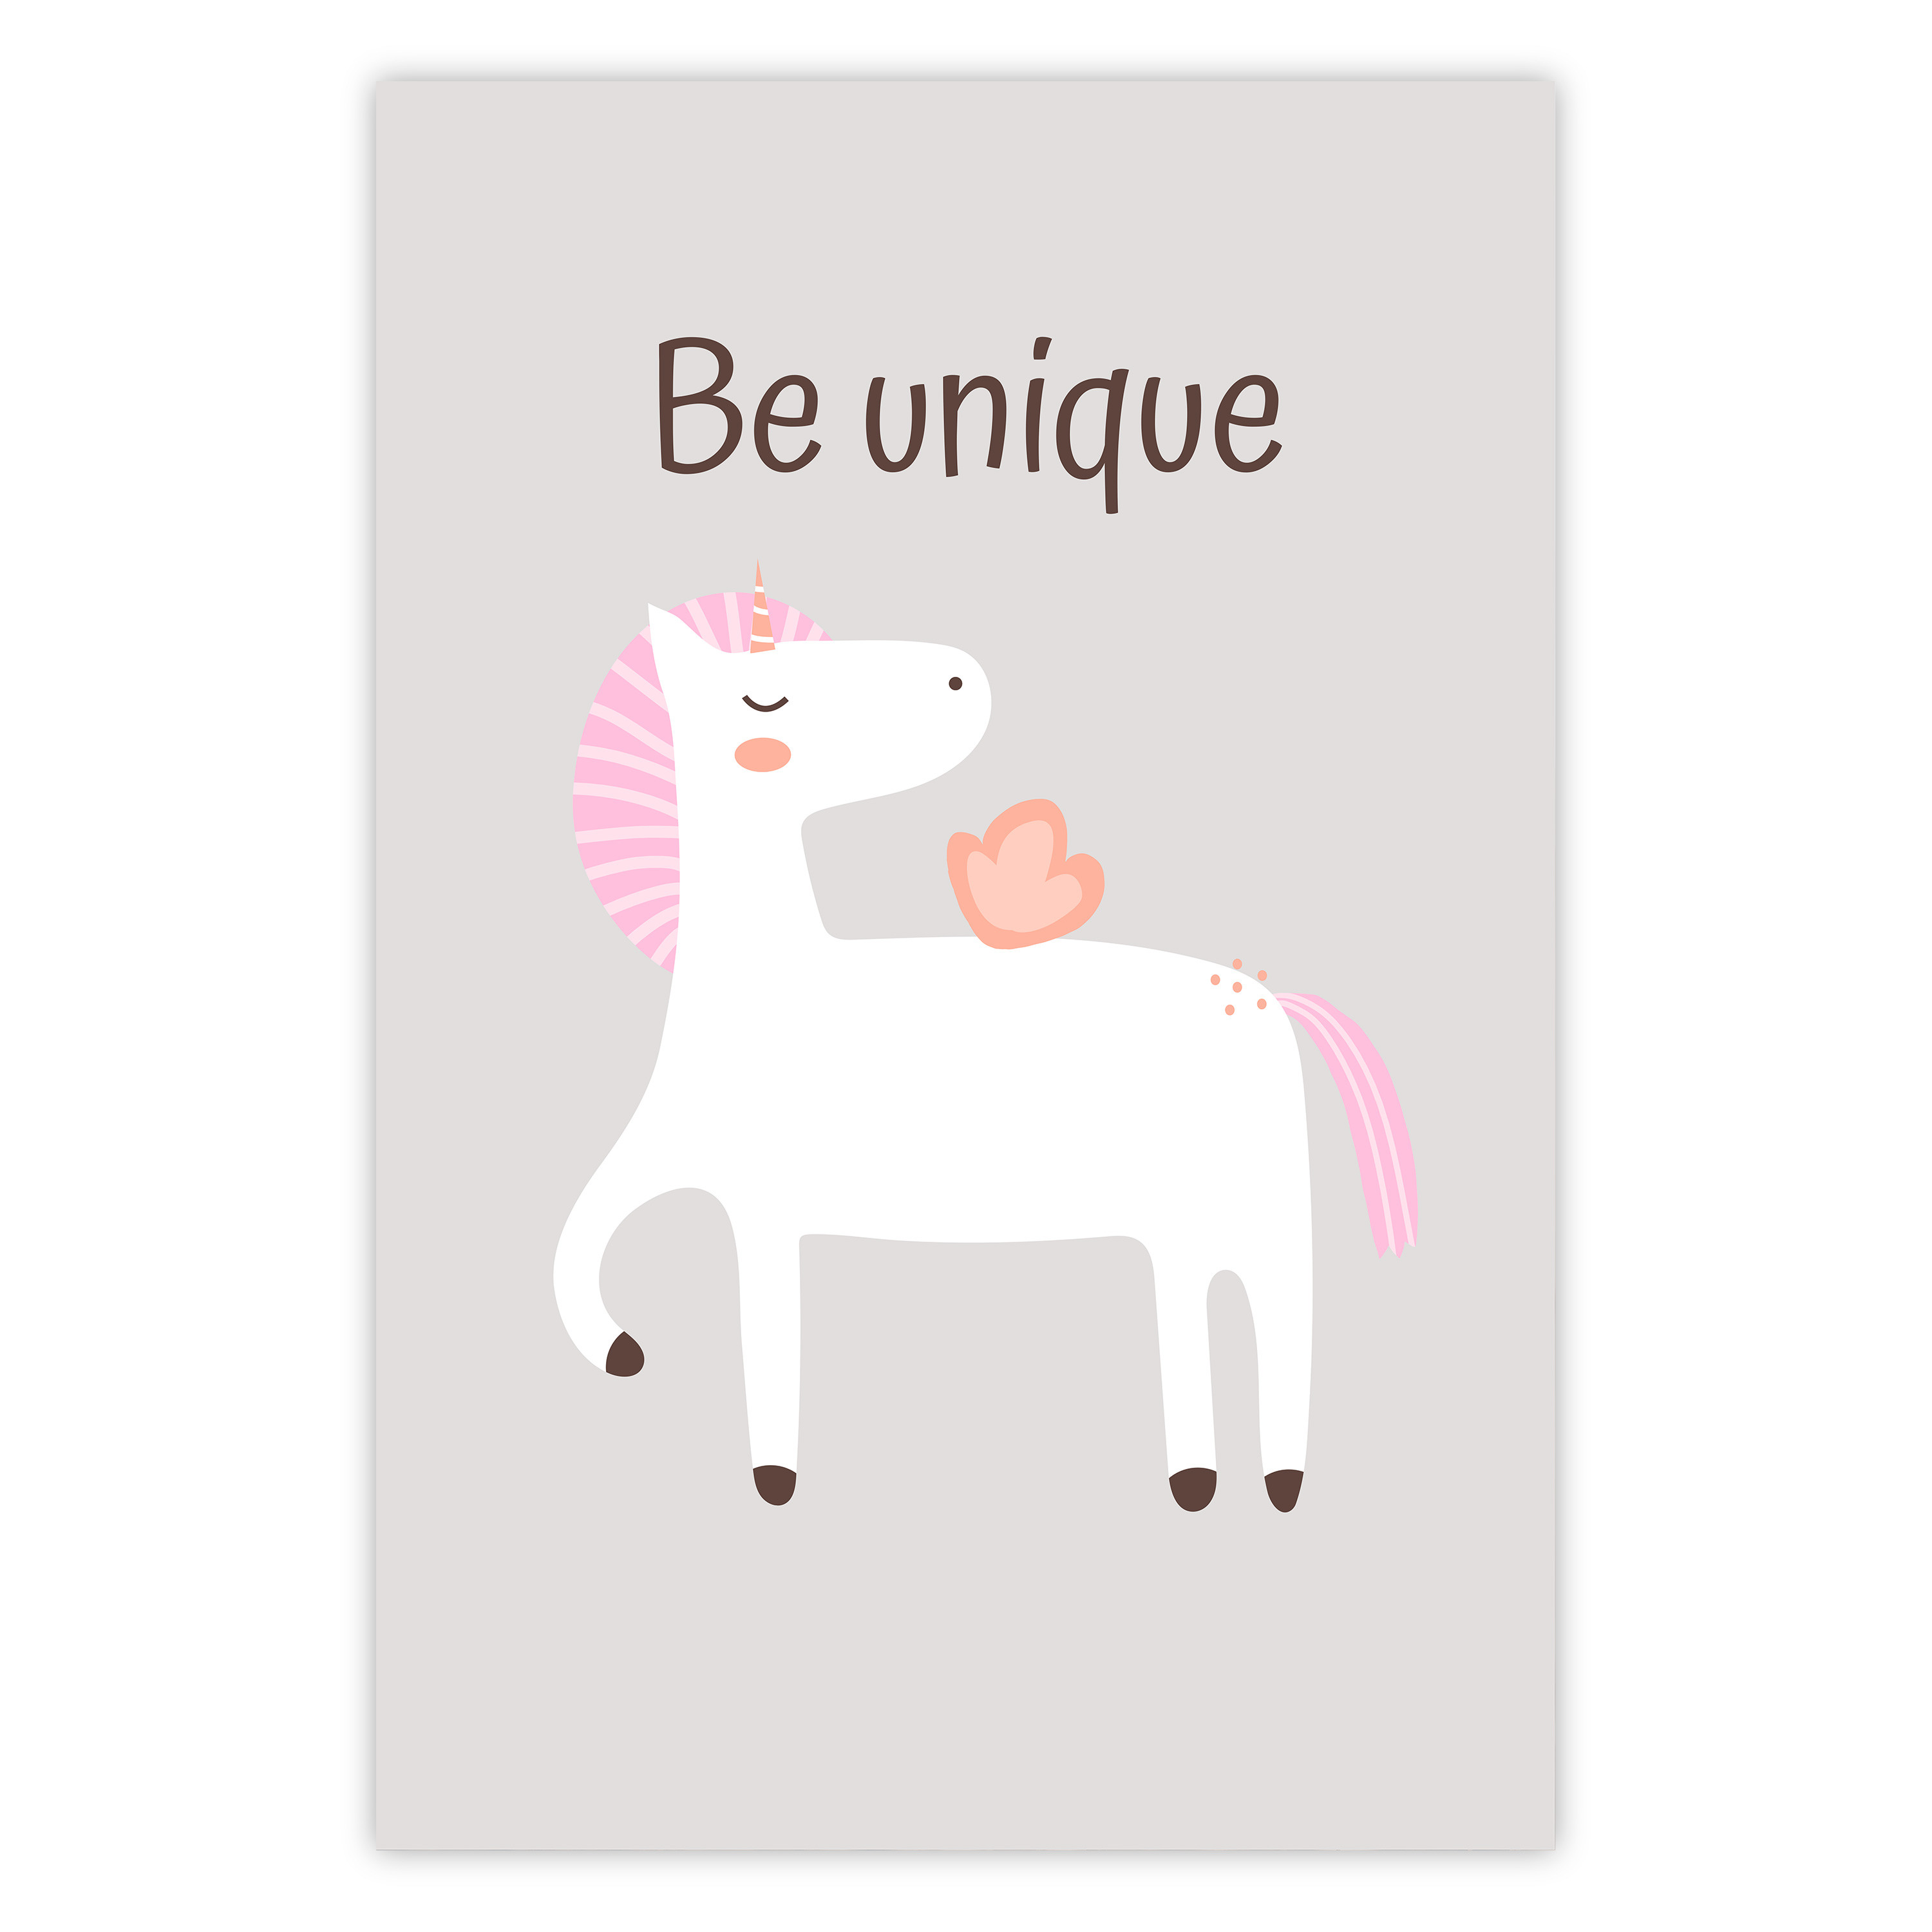 Wandposter Be Unique - Cheerful Unicorn and a Motivating Slogan for Kids -  Poster